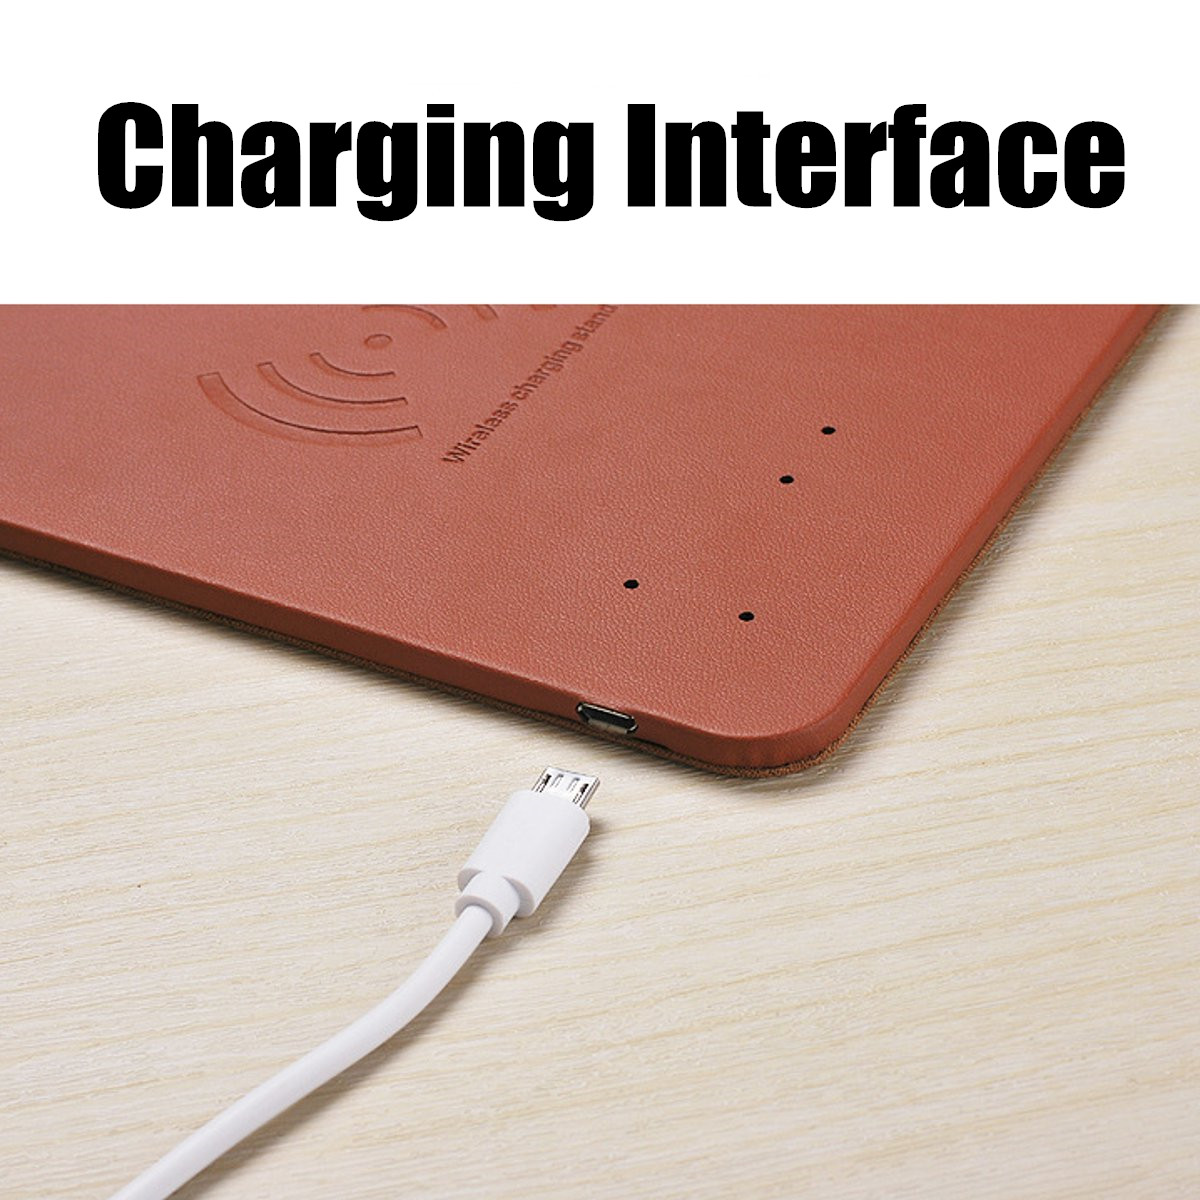 Imitation Leather Mobile Phones Wireless Fast Charger Mouse Pad Qi Wireless Charging 17